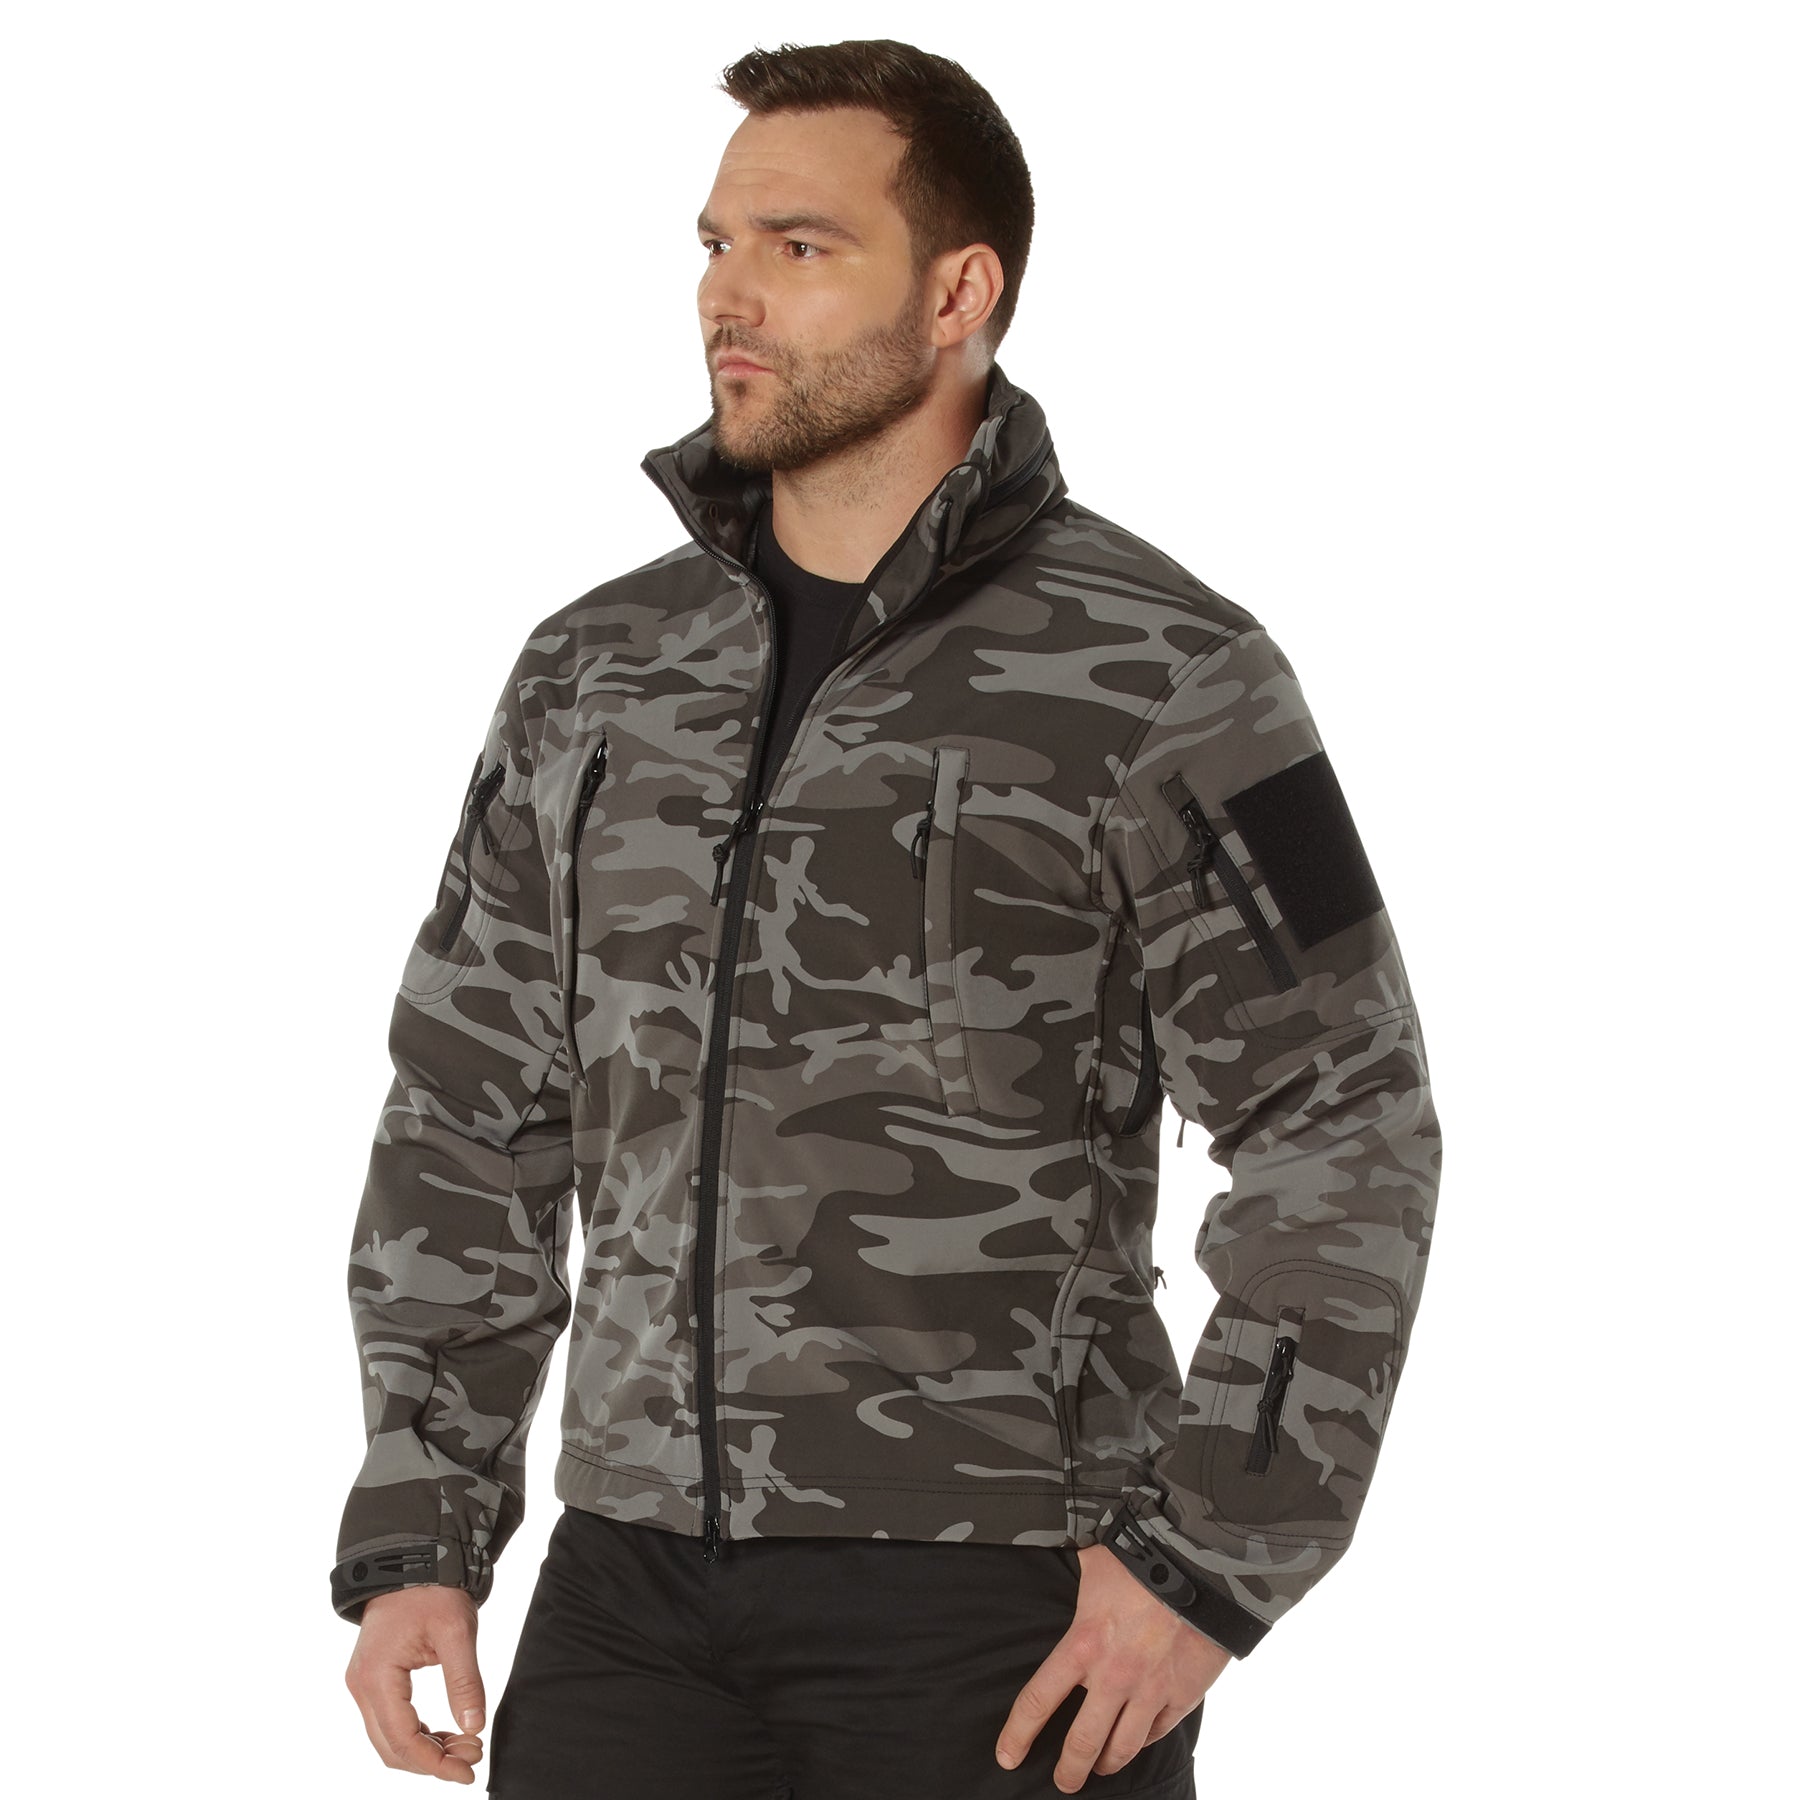 Poly Camo Spec Ops Tactical Soft Shell Jackets Black Camo